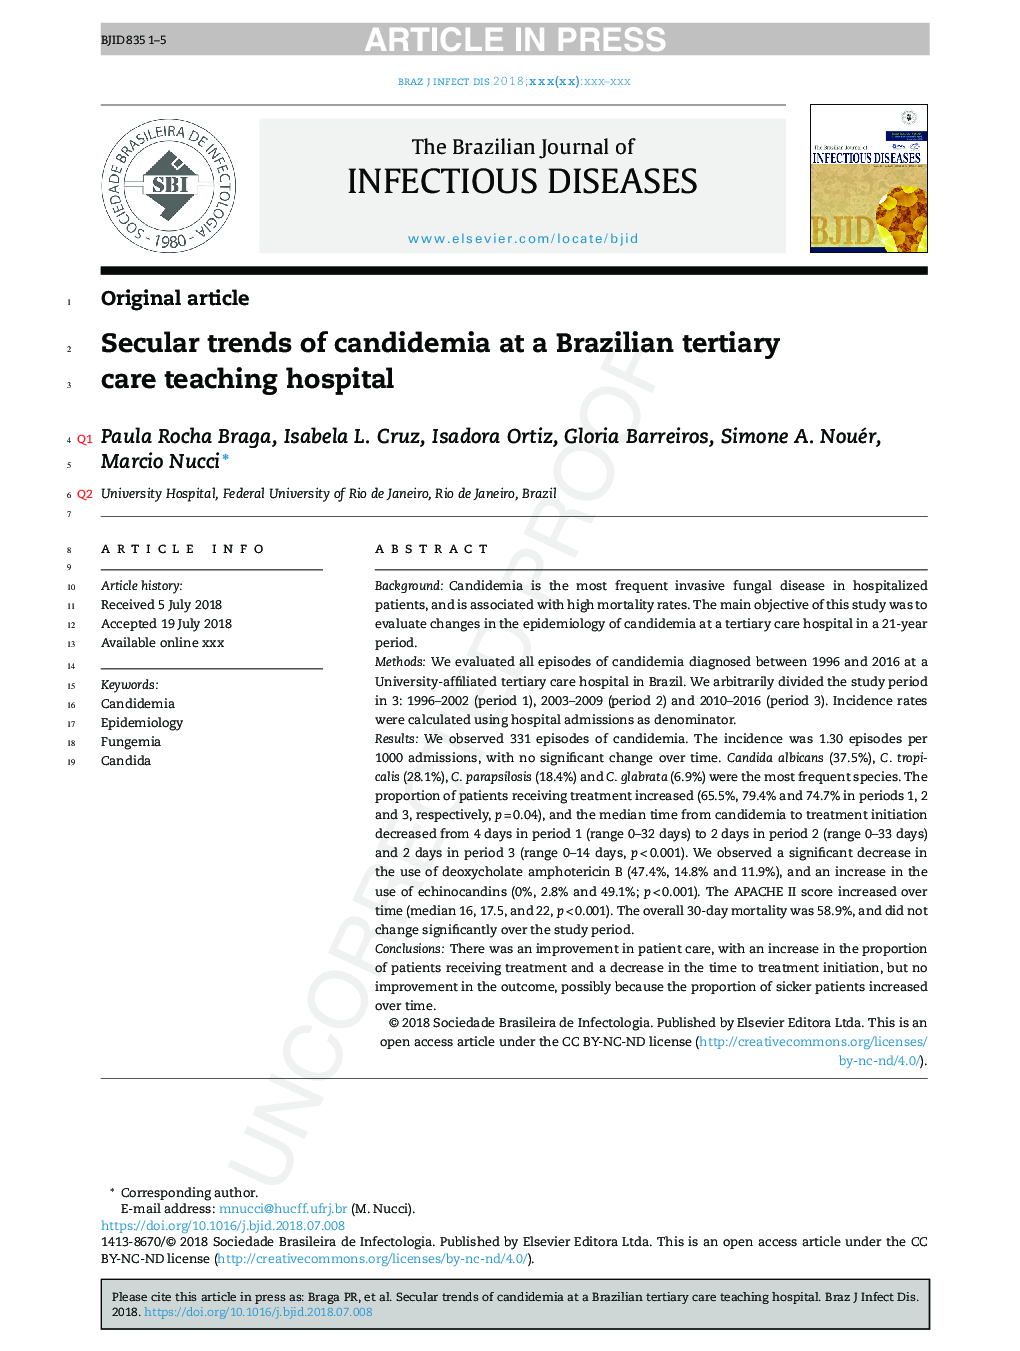 Secular trends of candidemia at a Brazilian tertiary care teaching hospital